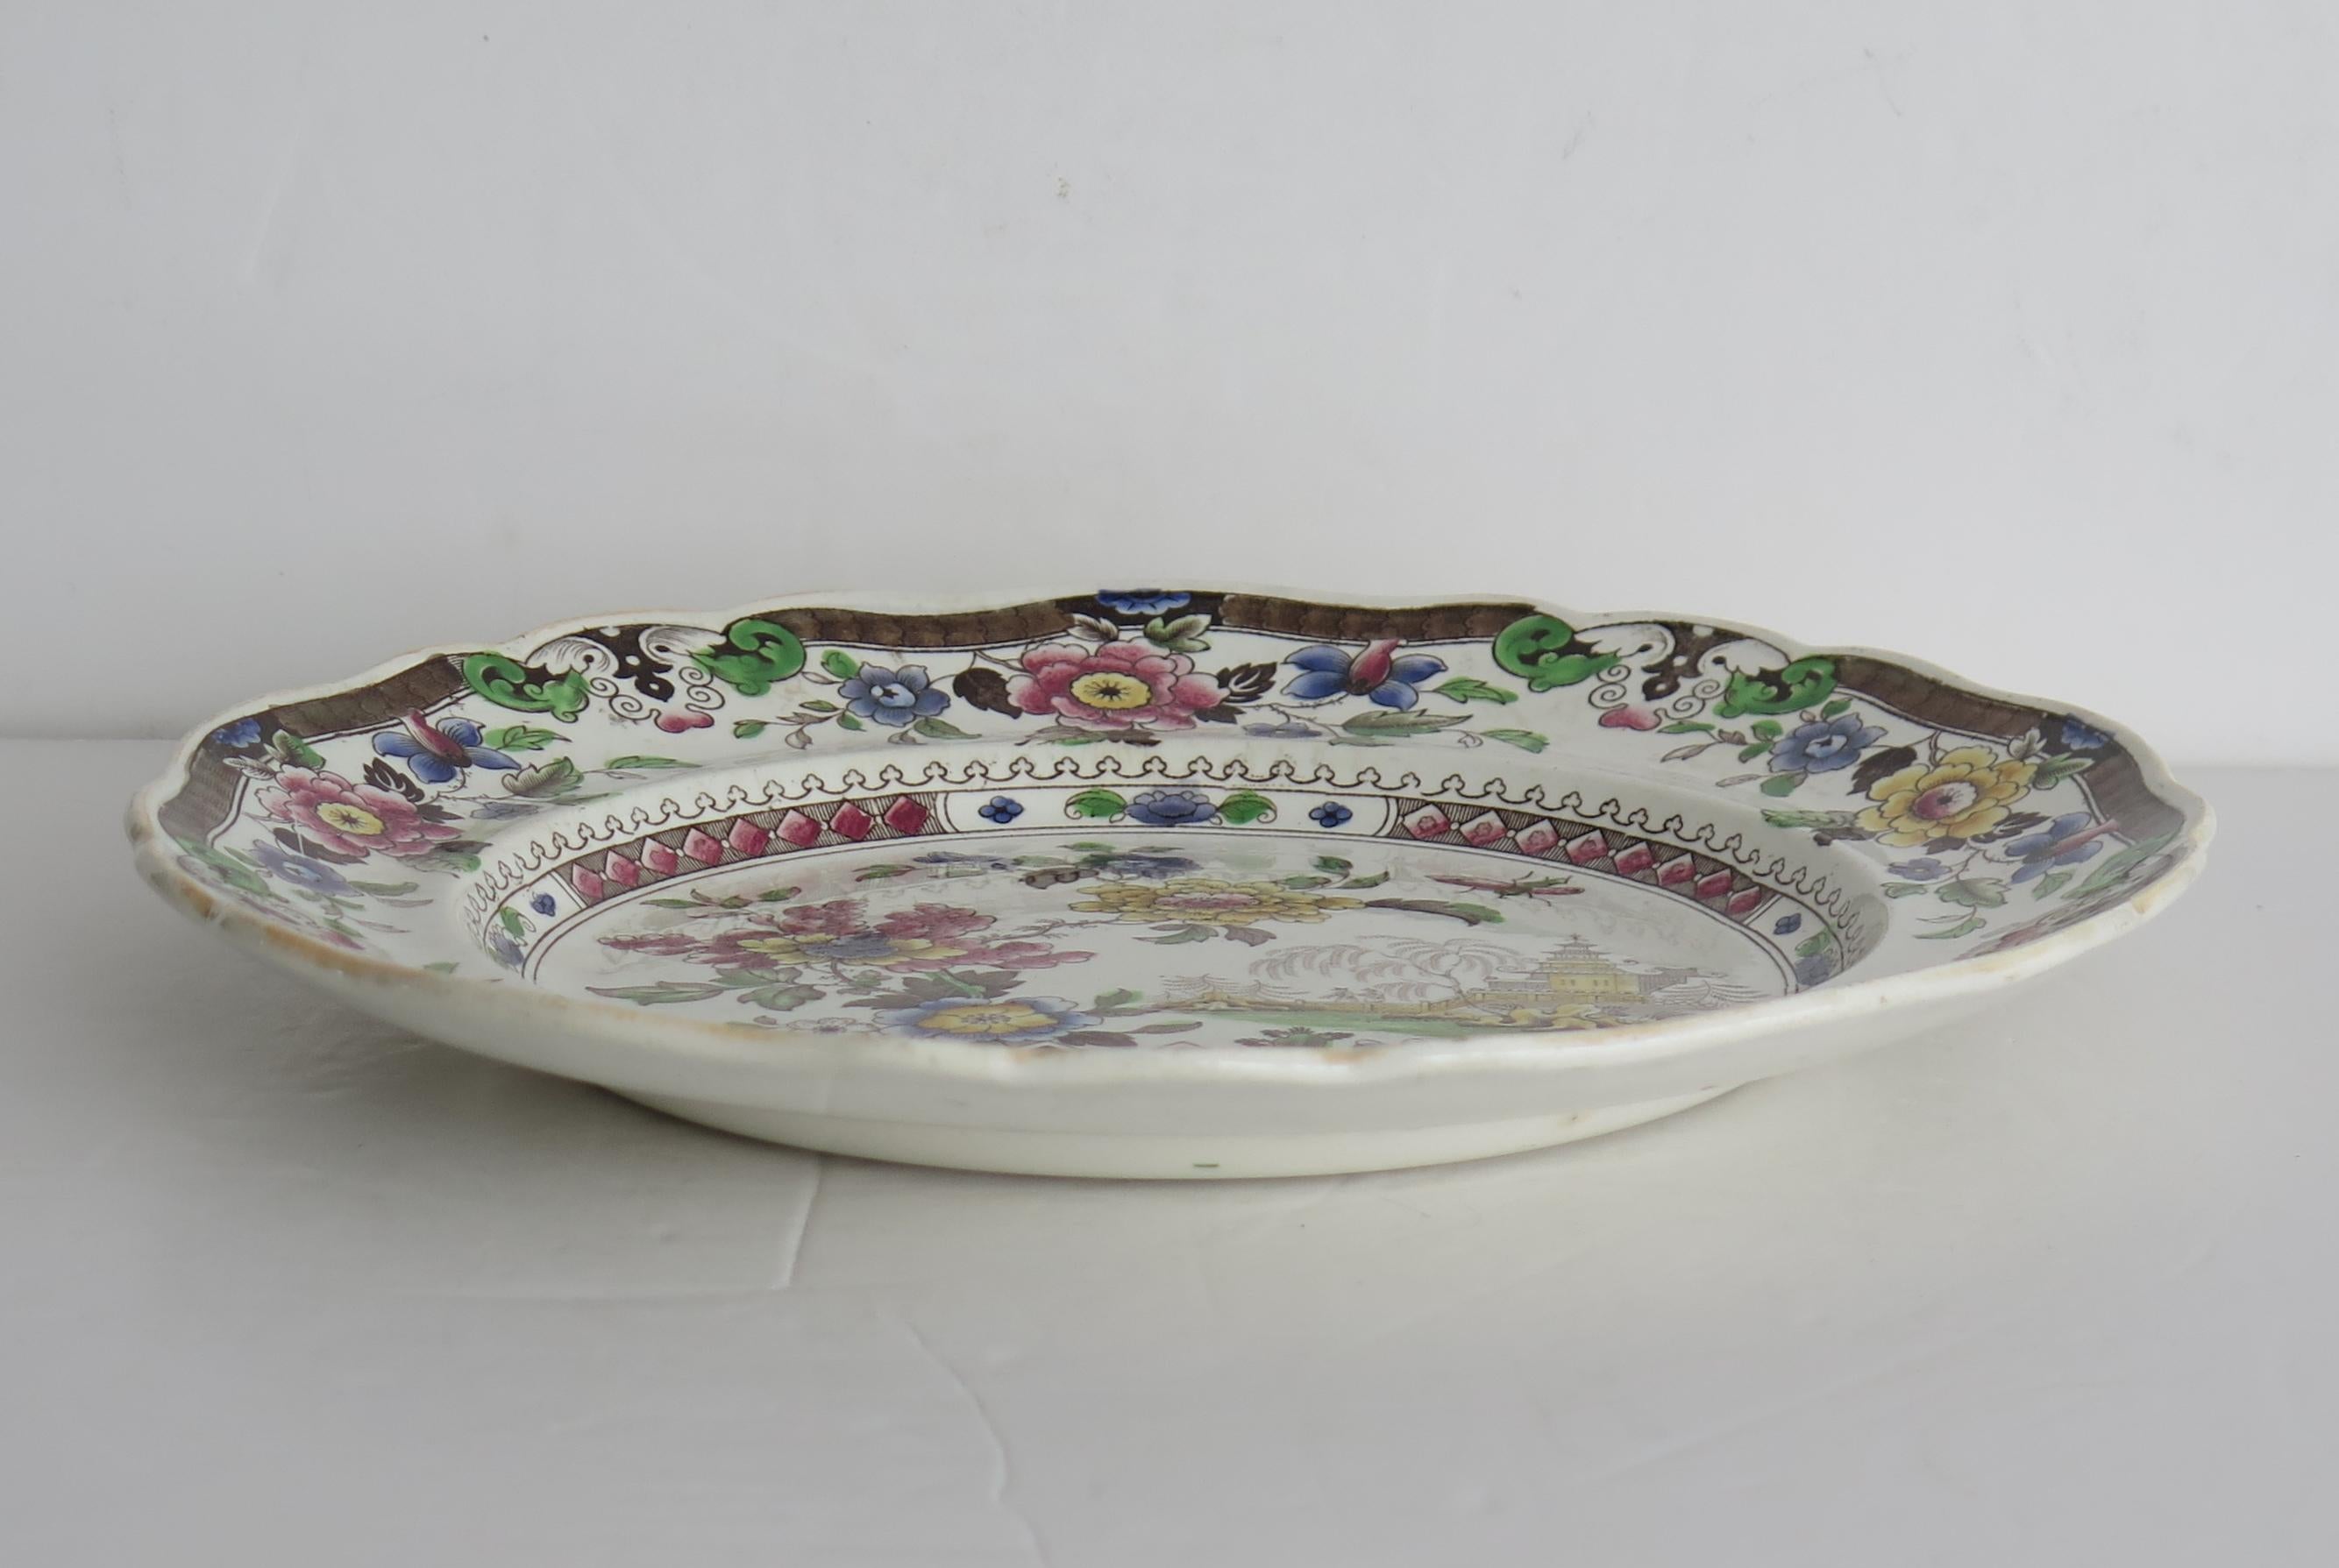 Large Pottery Dinner Plate by Zachariah Boyle Chinese Flora Pattern, circa 1825 In Good Condition For Sale In Lincoln, Lincolnshire